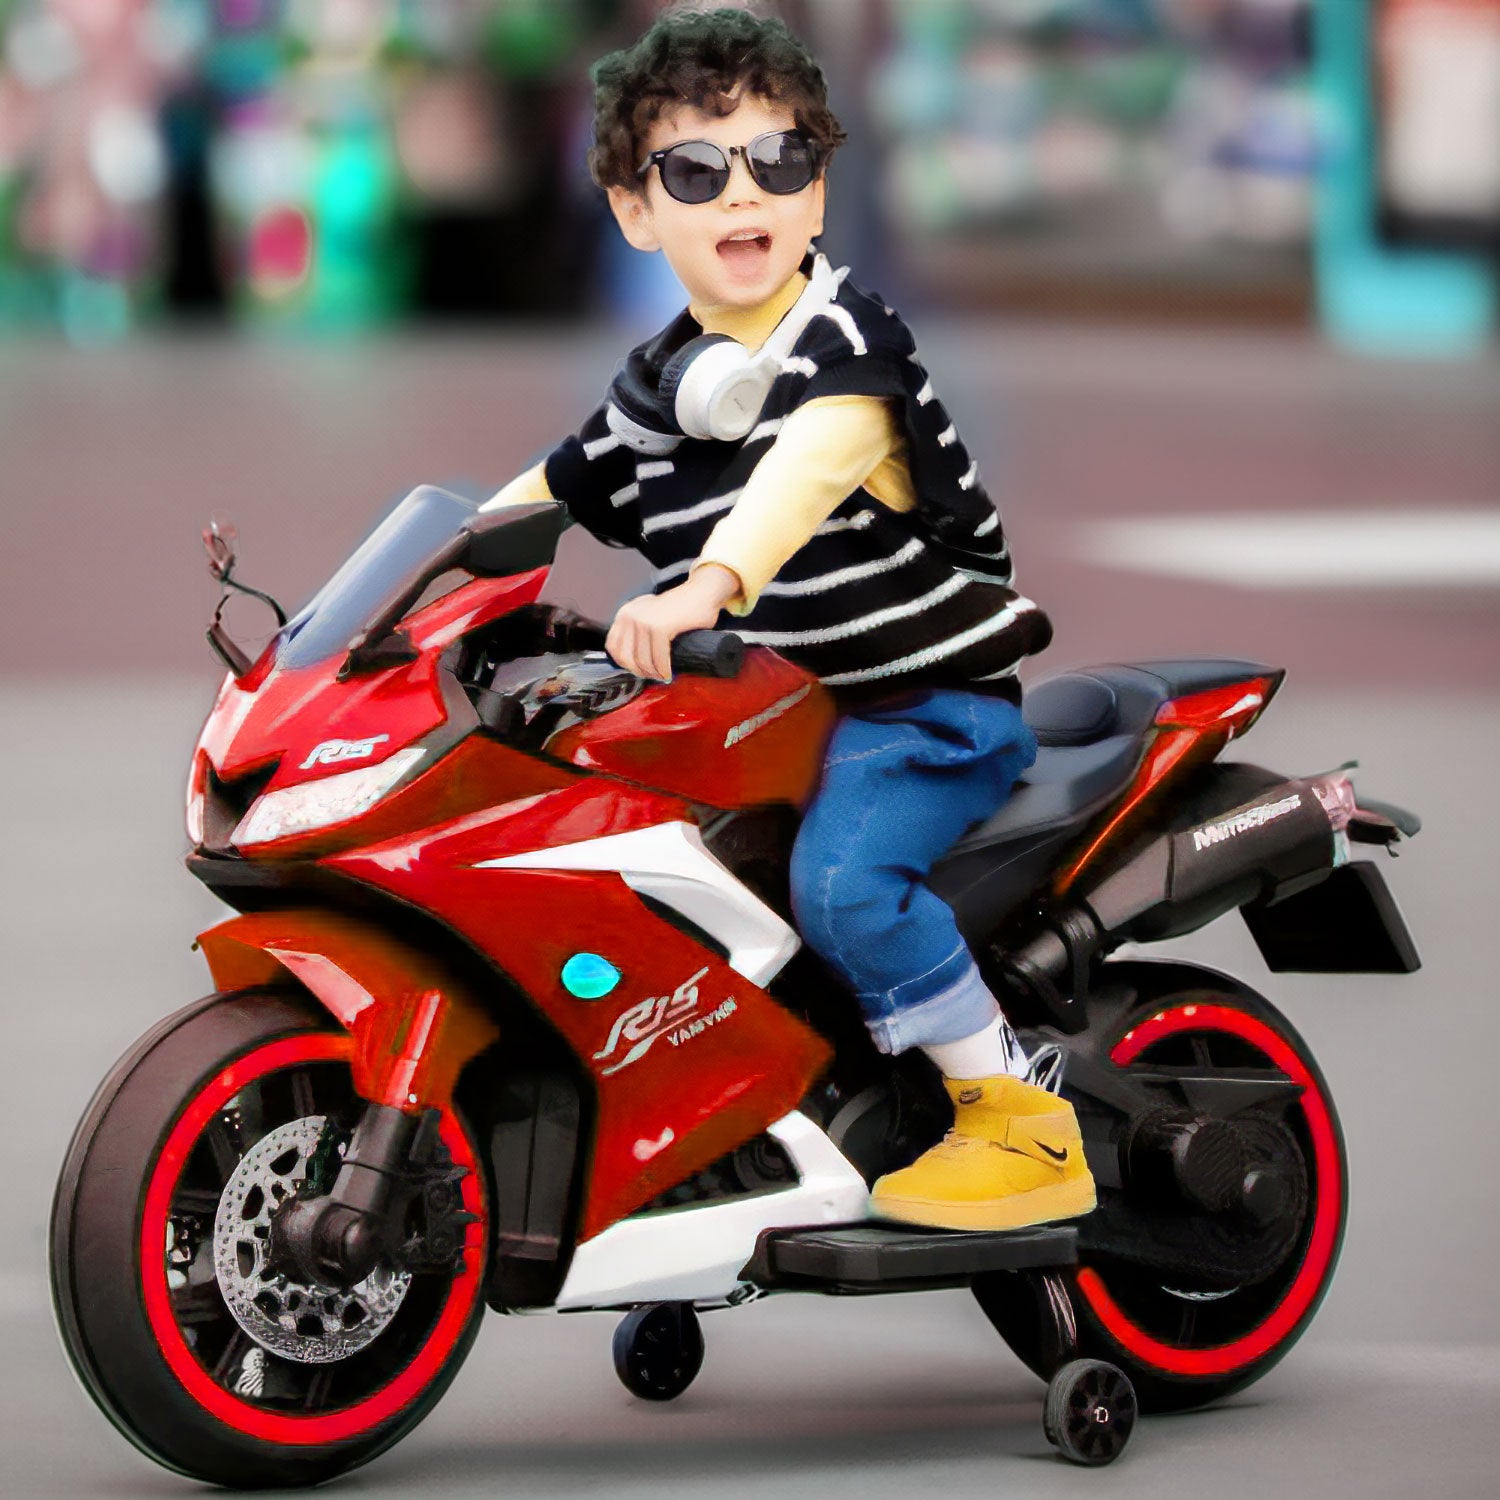 Baby Moo R15 Rechargeable 12V Battery Operated Ride On Bike for Kids with LED Lights, Music, and USB Port - Red